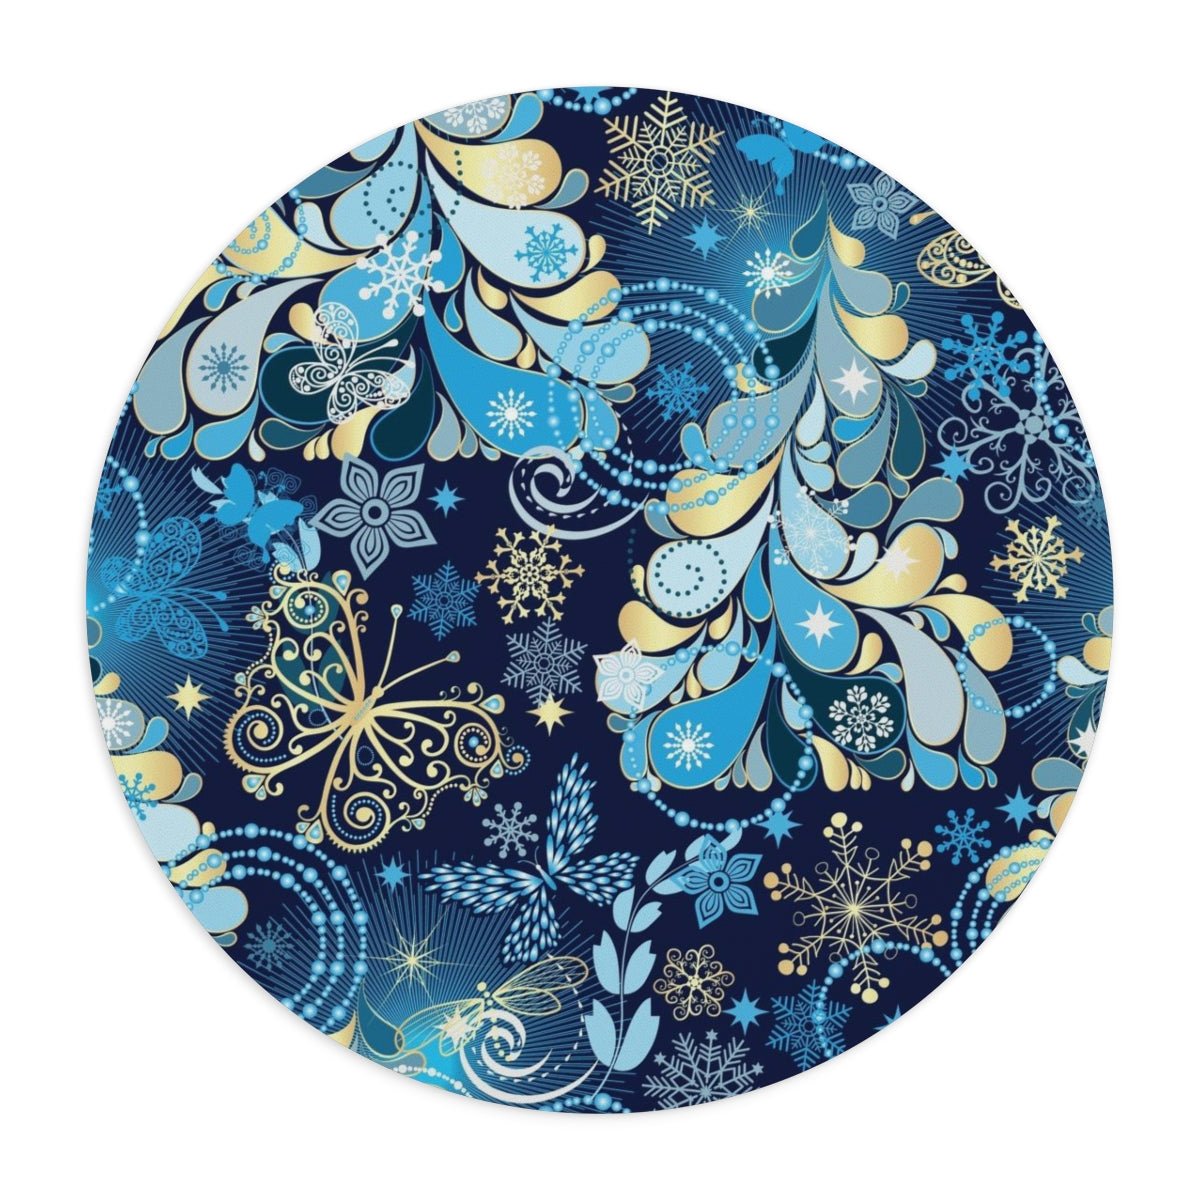 Magical Snowflakes Mouse Pad - Puffin Lime